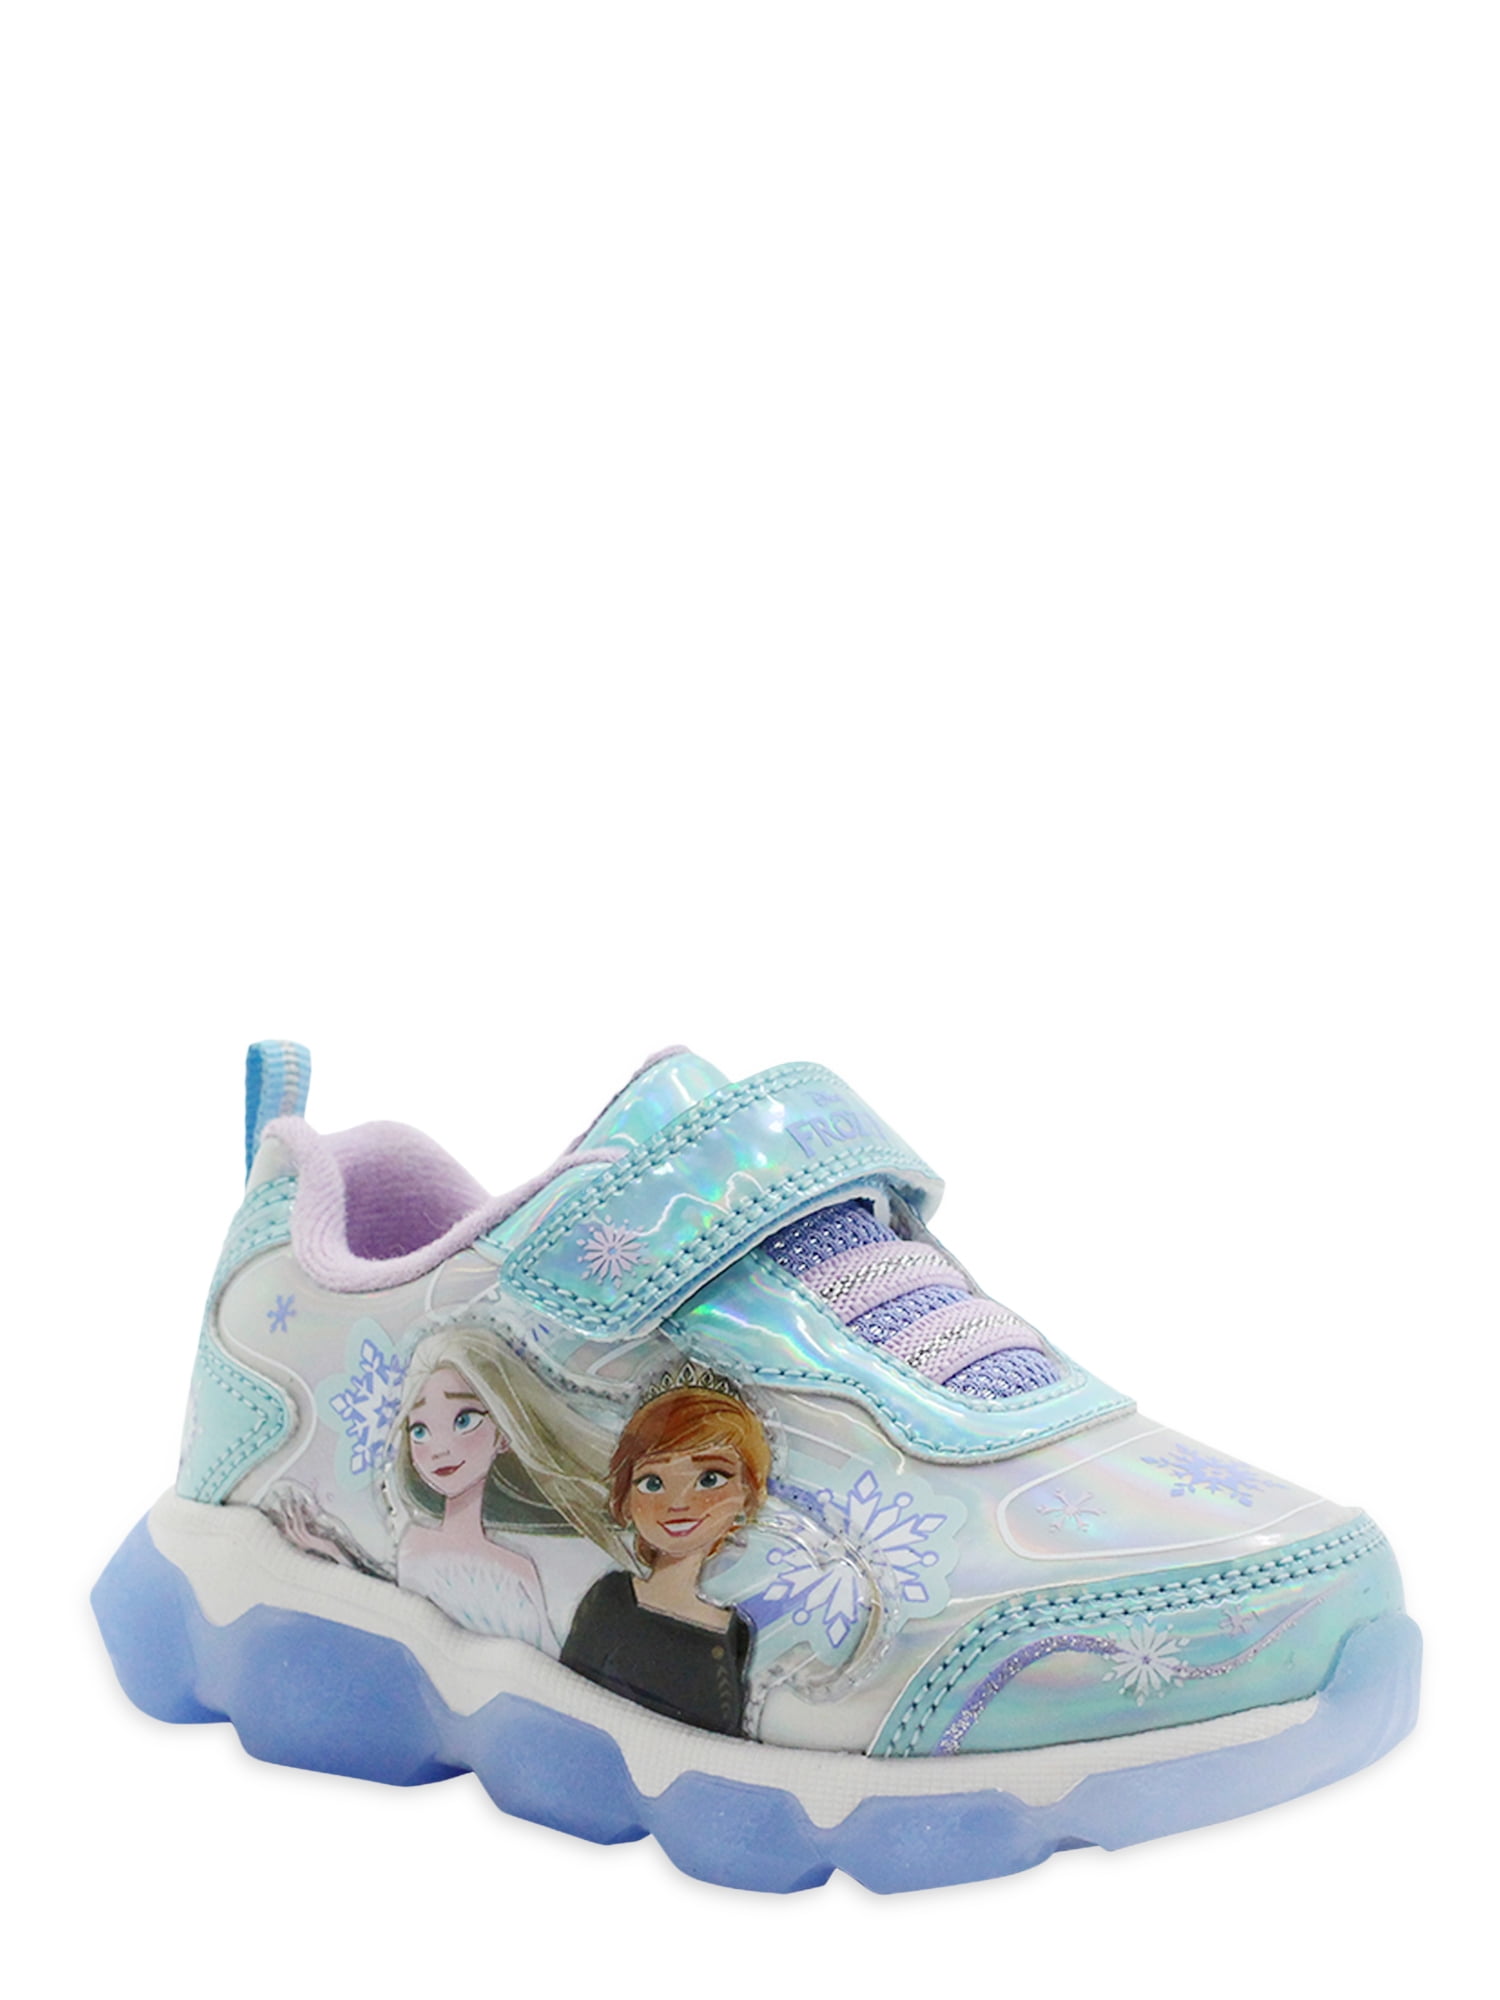 7 Frozen shoes toddler Elsa & Anna choice of size 6 9 